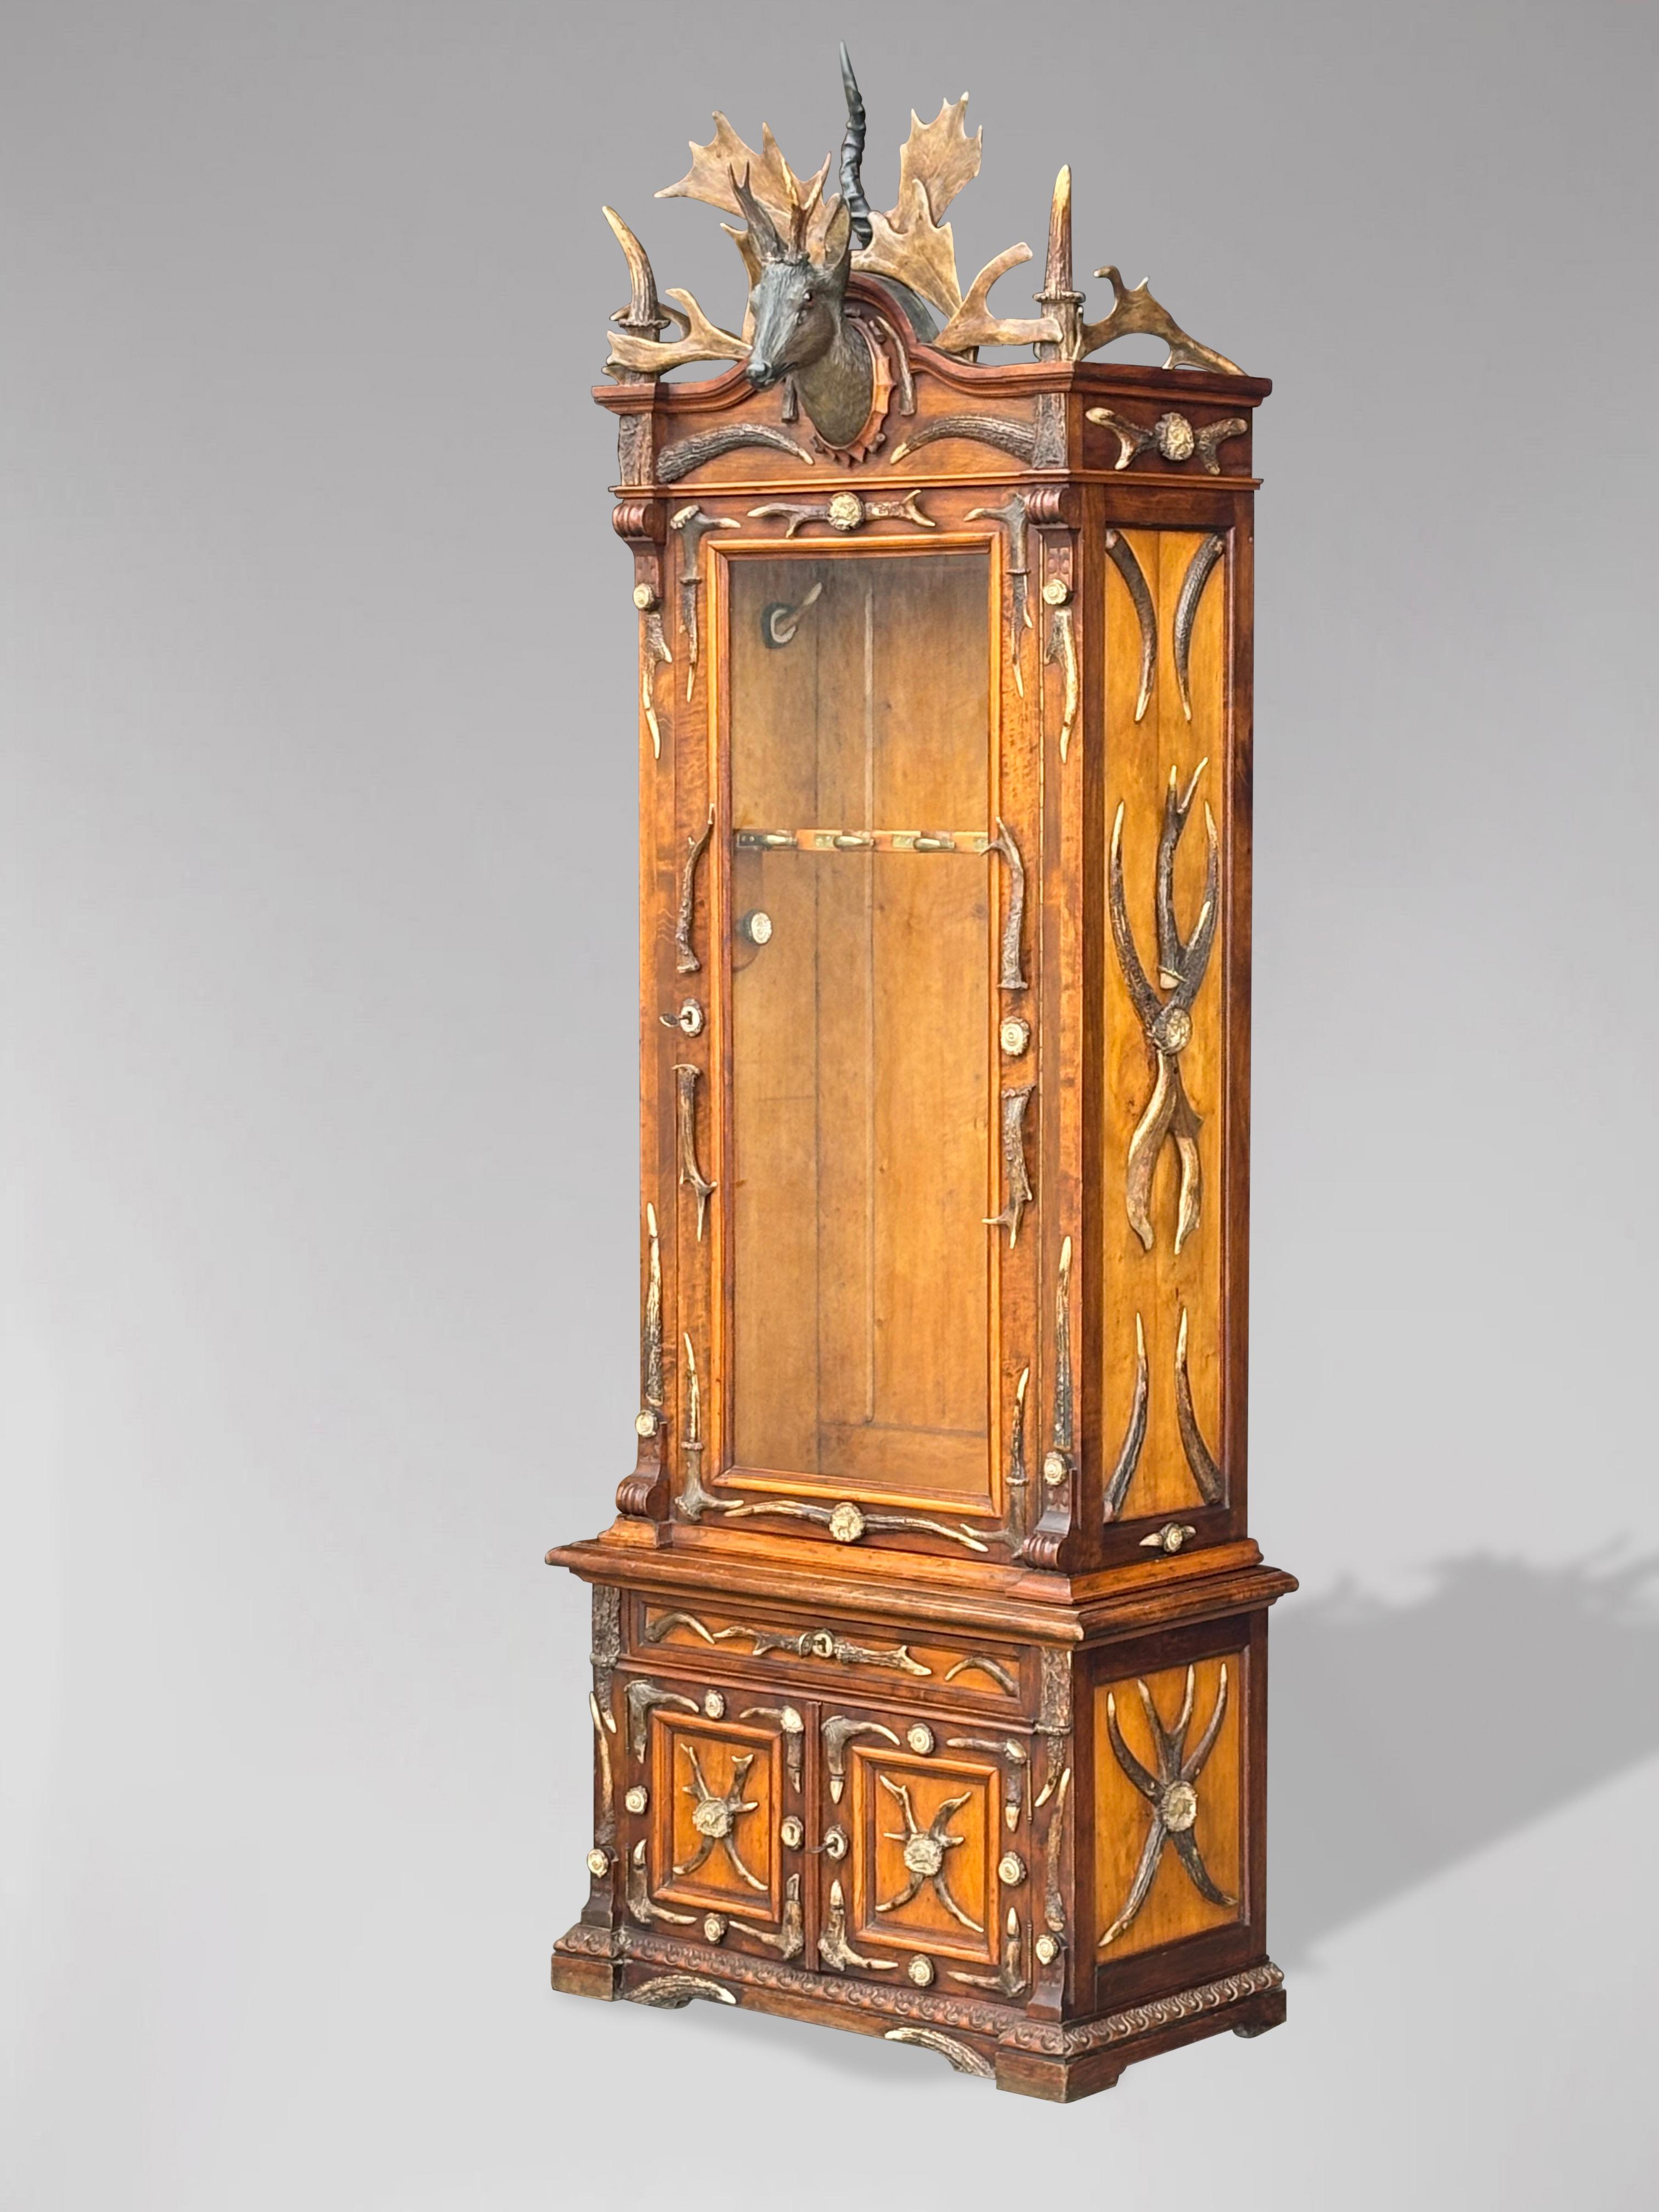 A late 19th century Black Forest, German Austrian, two parts mahogany antler gun cabinet. The top section has a single large glazed door, followed by a base with one drawer over two doors. The top is crowned with one of the most startlingly